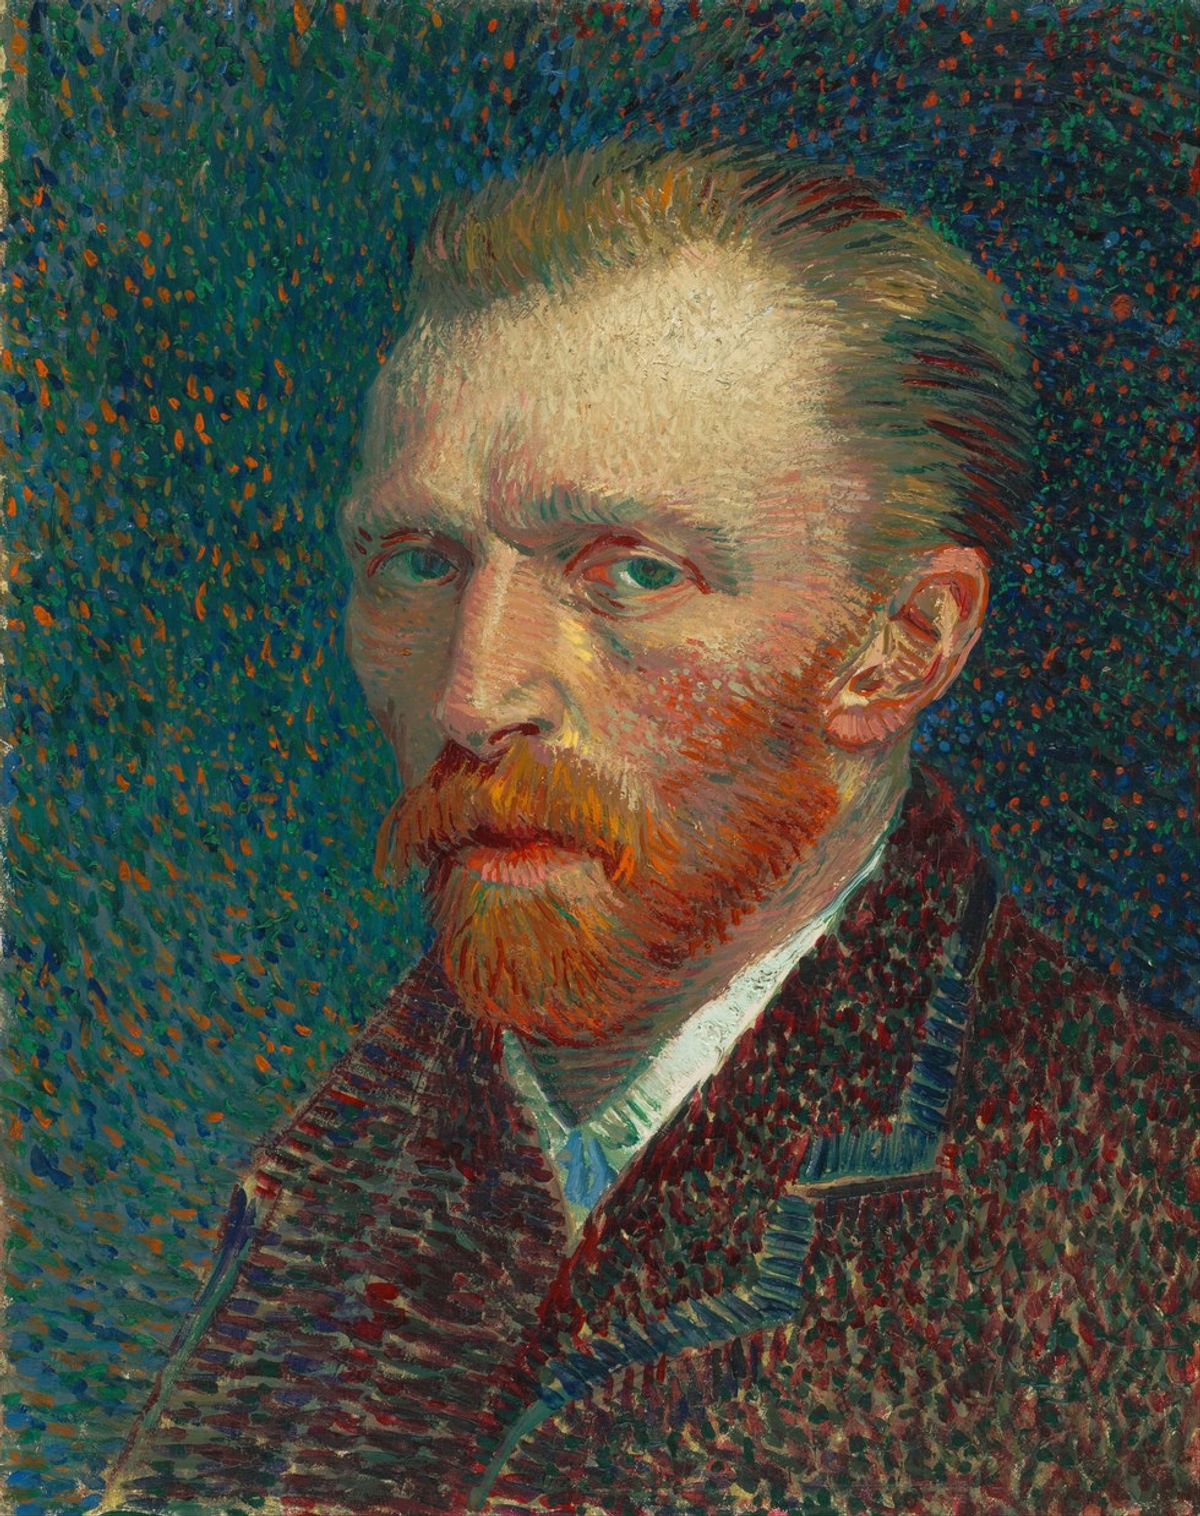 Vincent van Gogh: The Greatest Artist Who Ever Lived